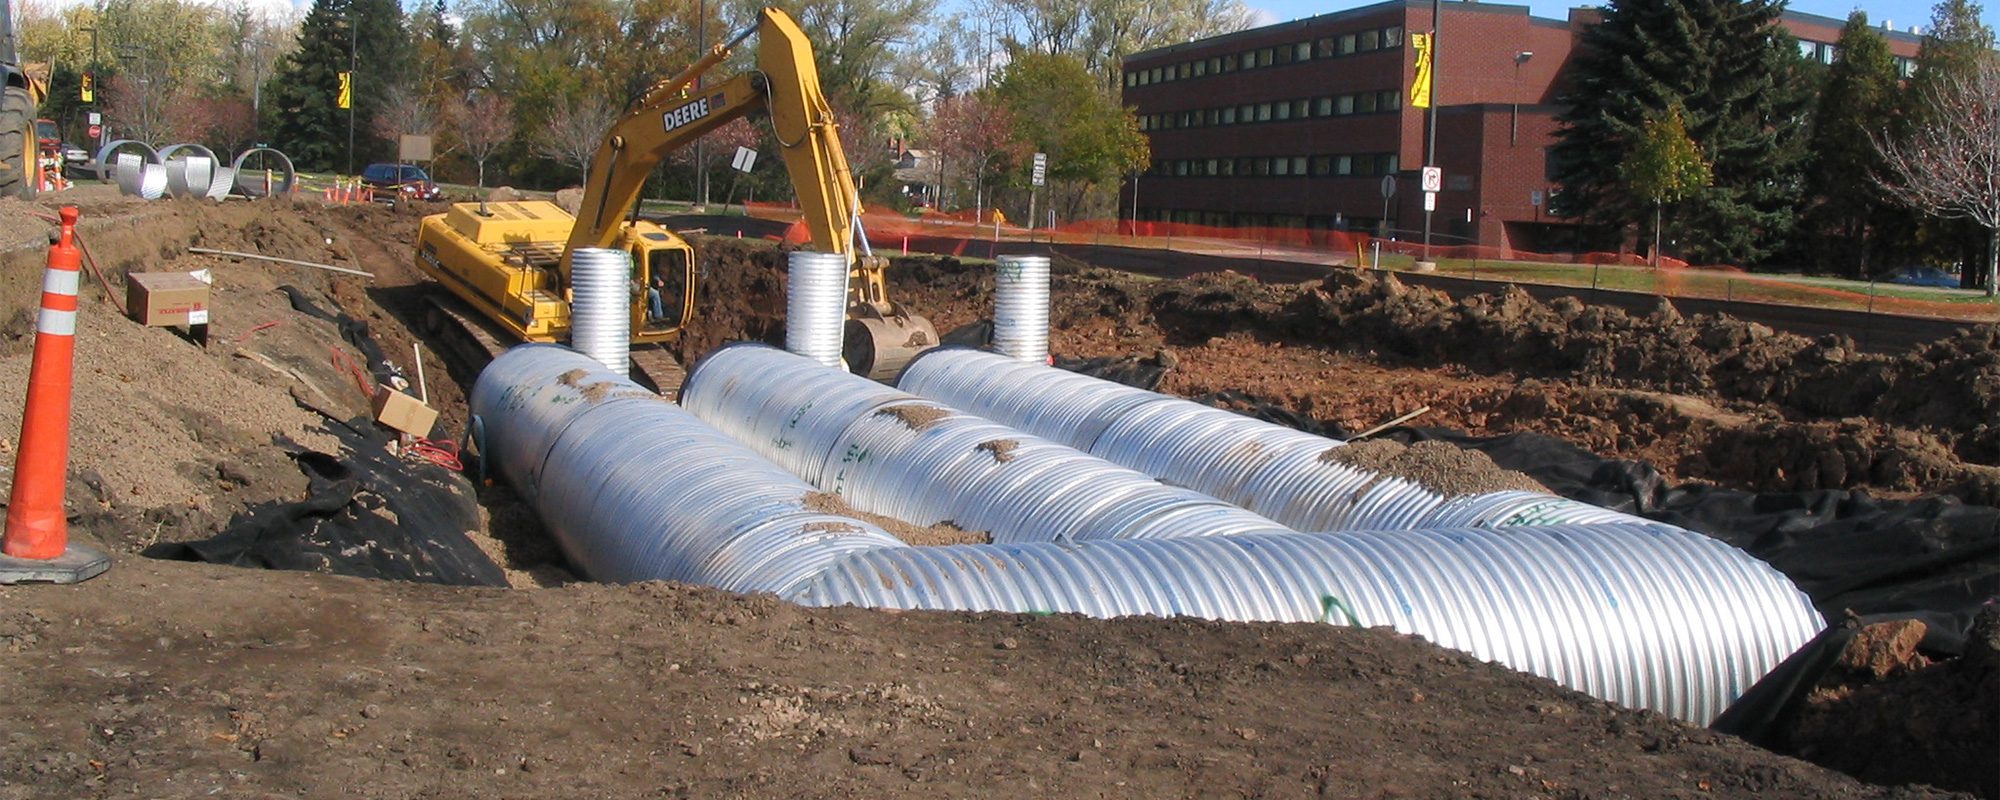 large utility infrastructure tubes being buried underground